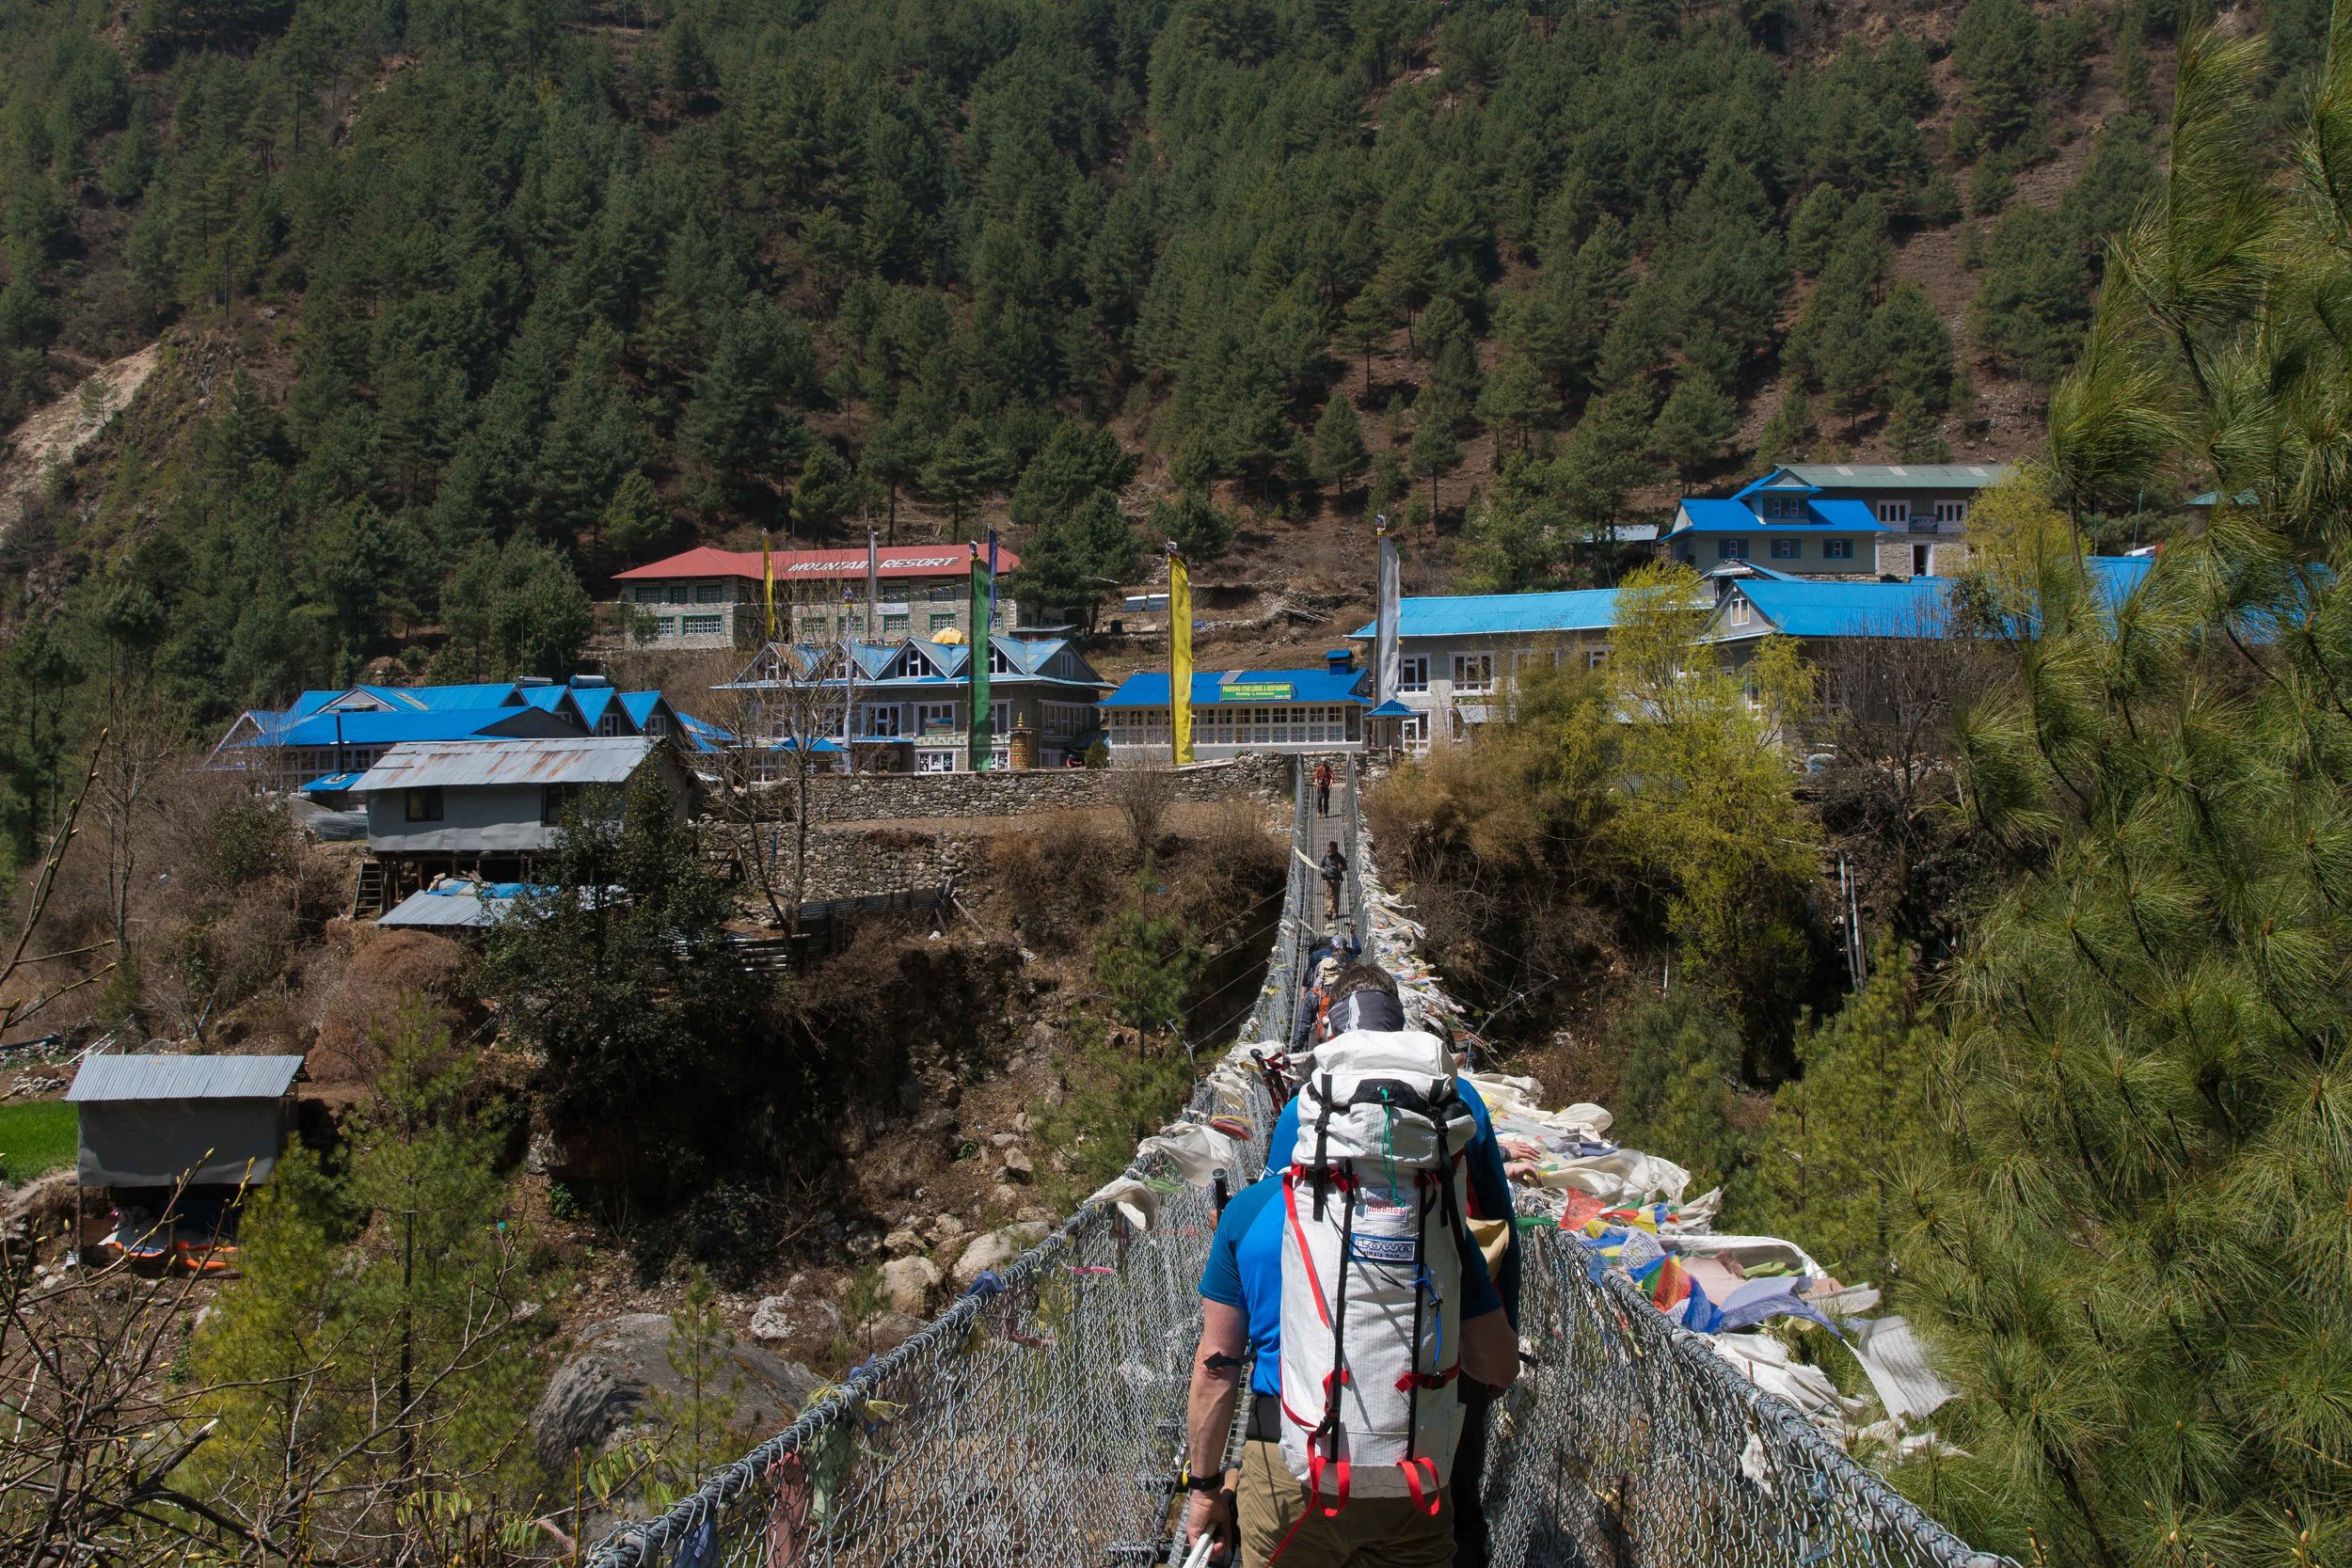 One of the first bridge crossings on the way to Namche Bazar